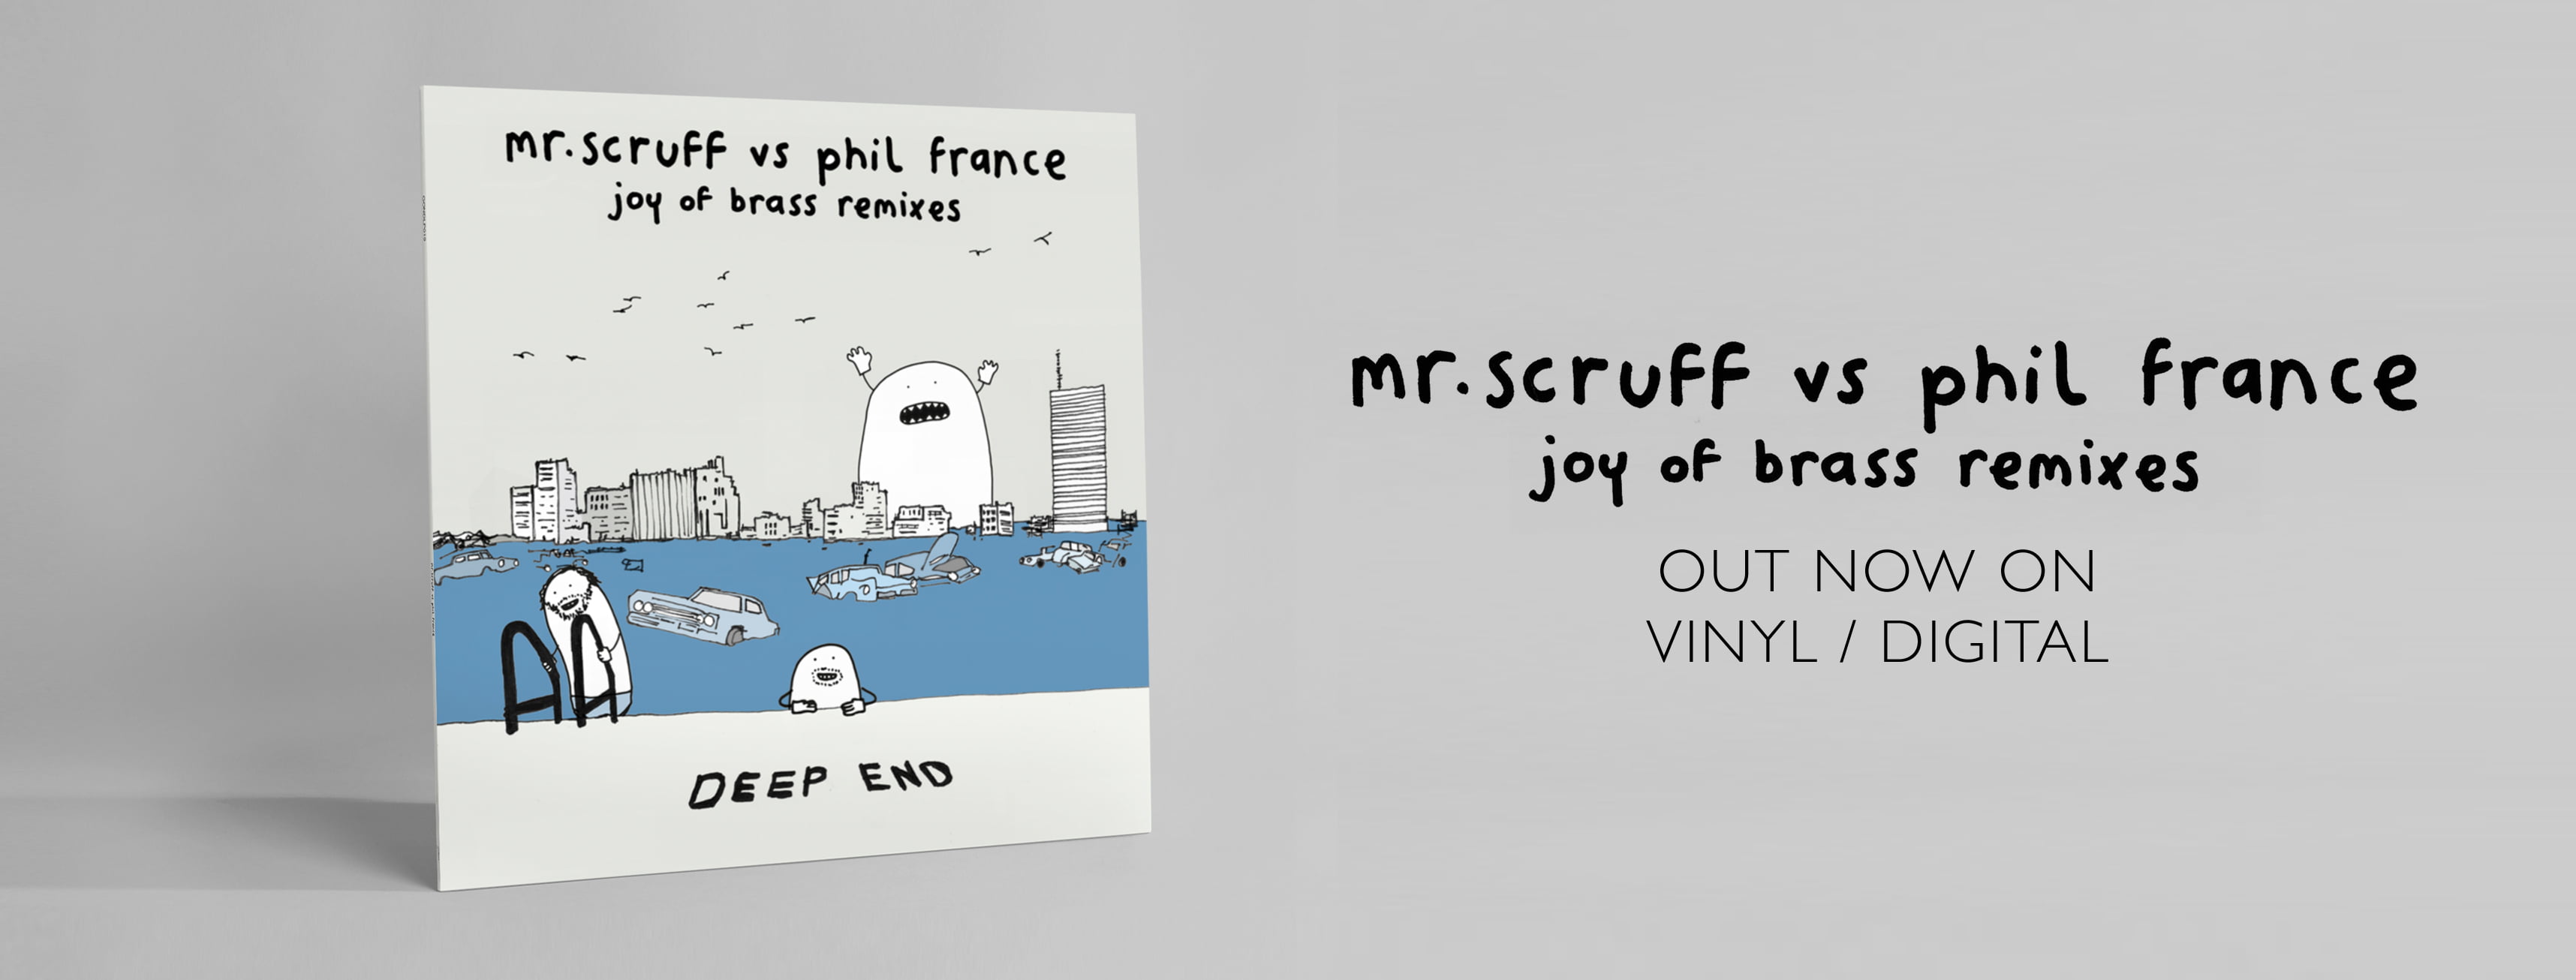 Mr. Scruff Vs Phil France Joy of Brass (Facebook Banner) OUT NOW